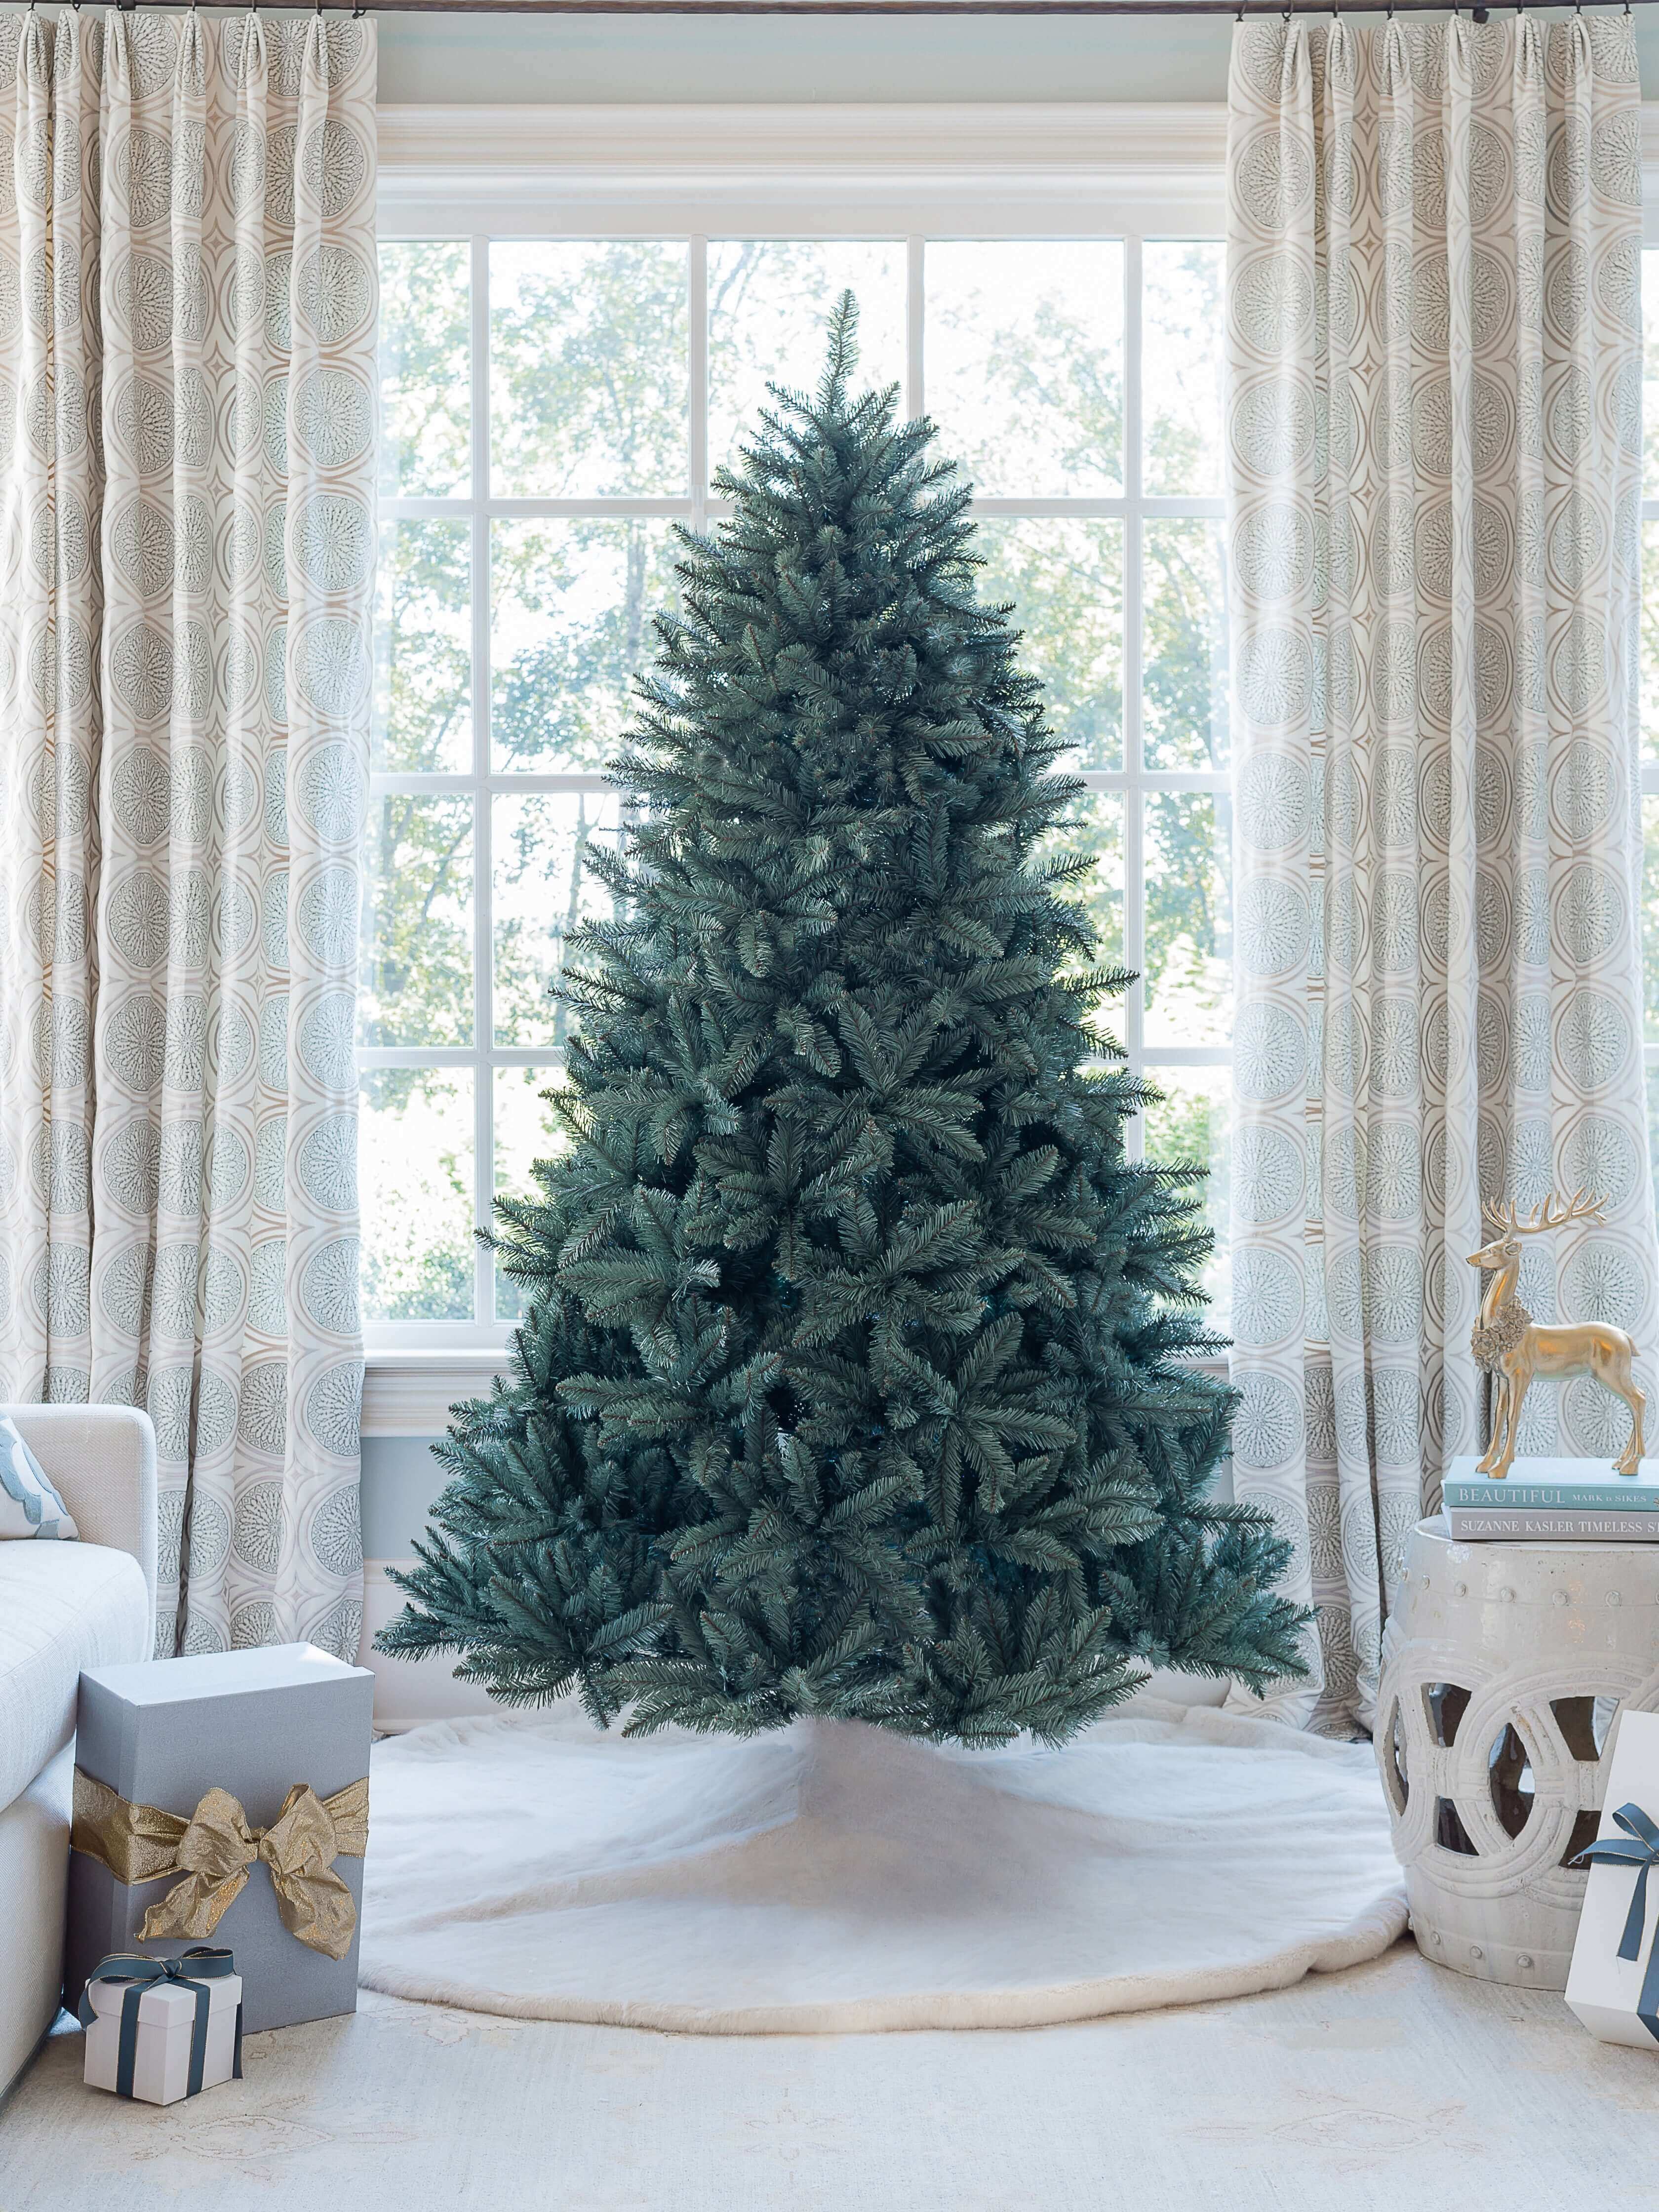 King of Christmas (OPEN BOX) 8' Tribeca Spruce Blue Artificial Christmas Tree Unlit. FINAL SALE